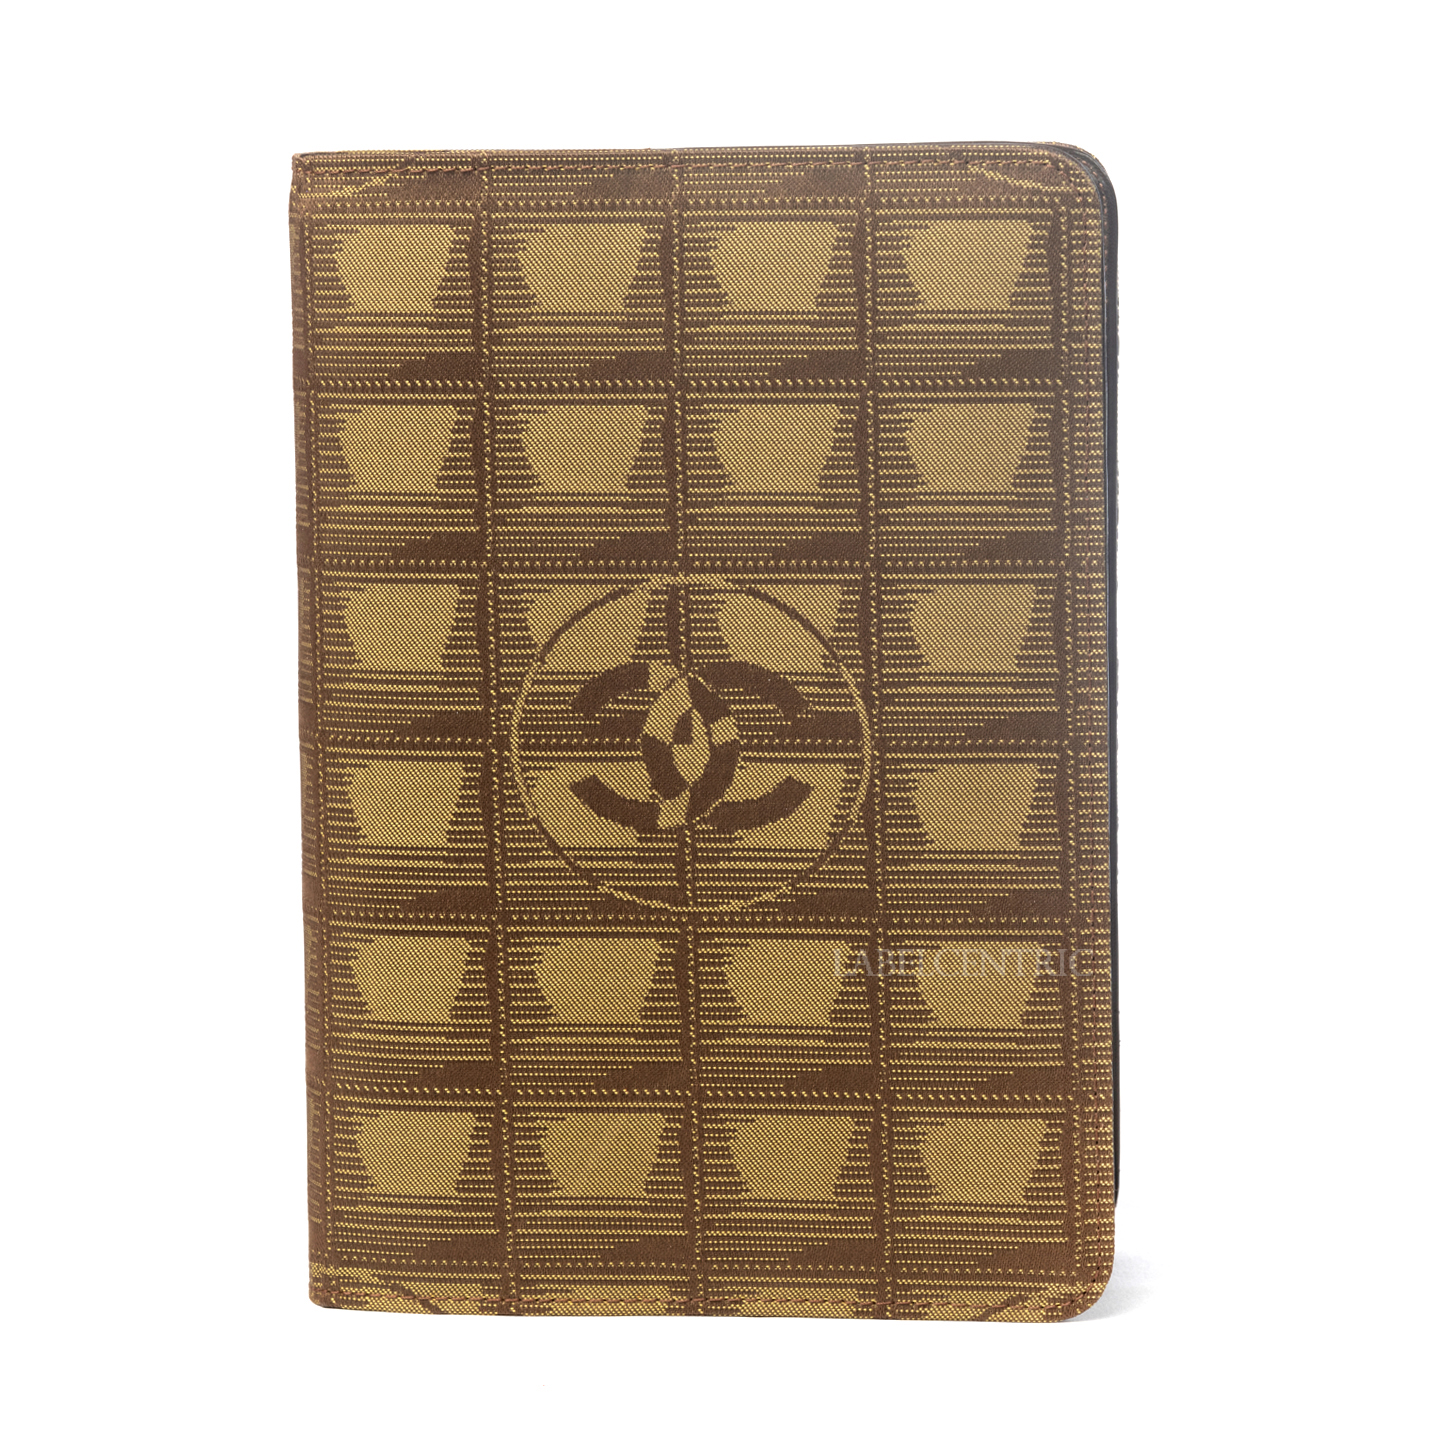 VINTAGE Chanel New Travel Line Agenda Notebook Cover - LabelCentric